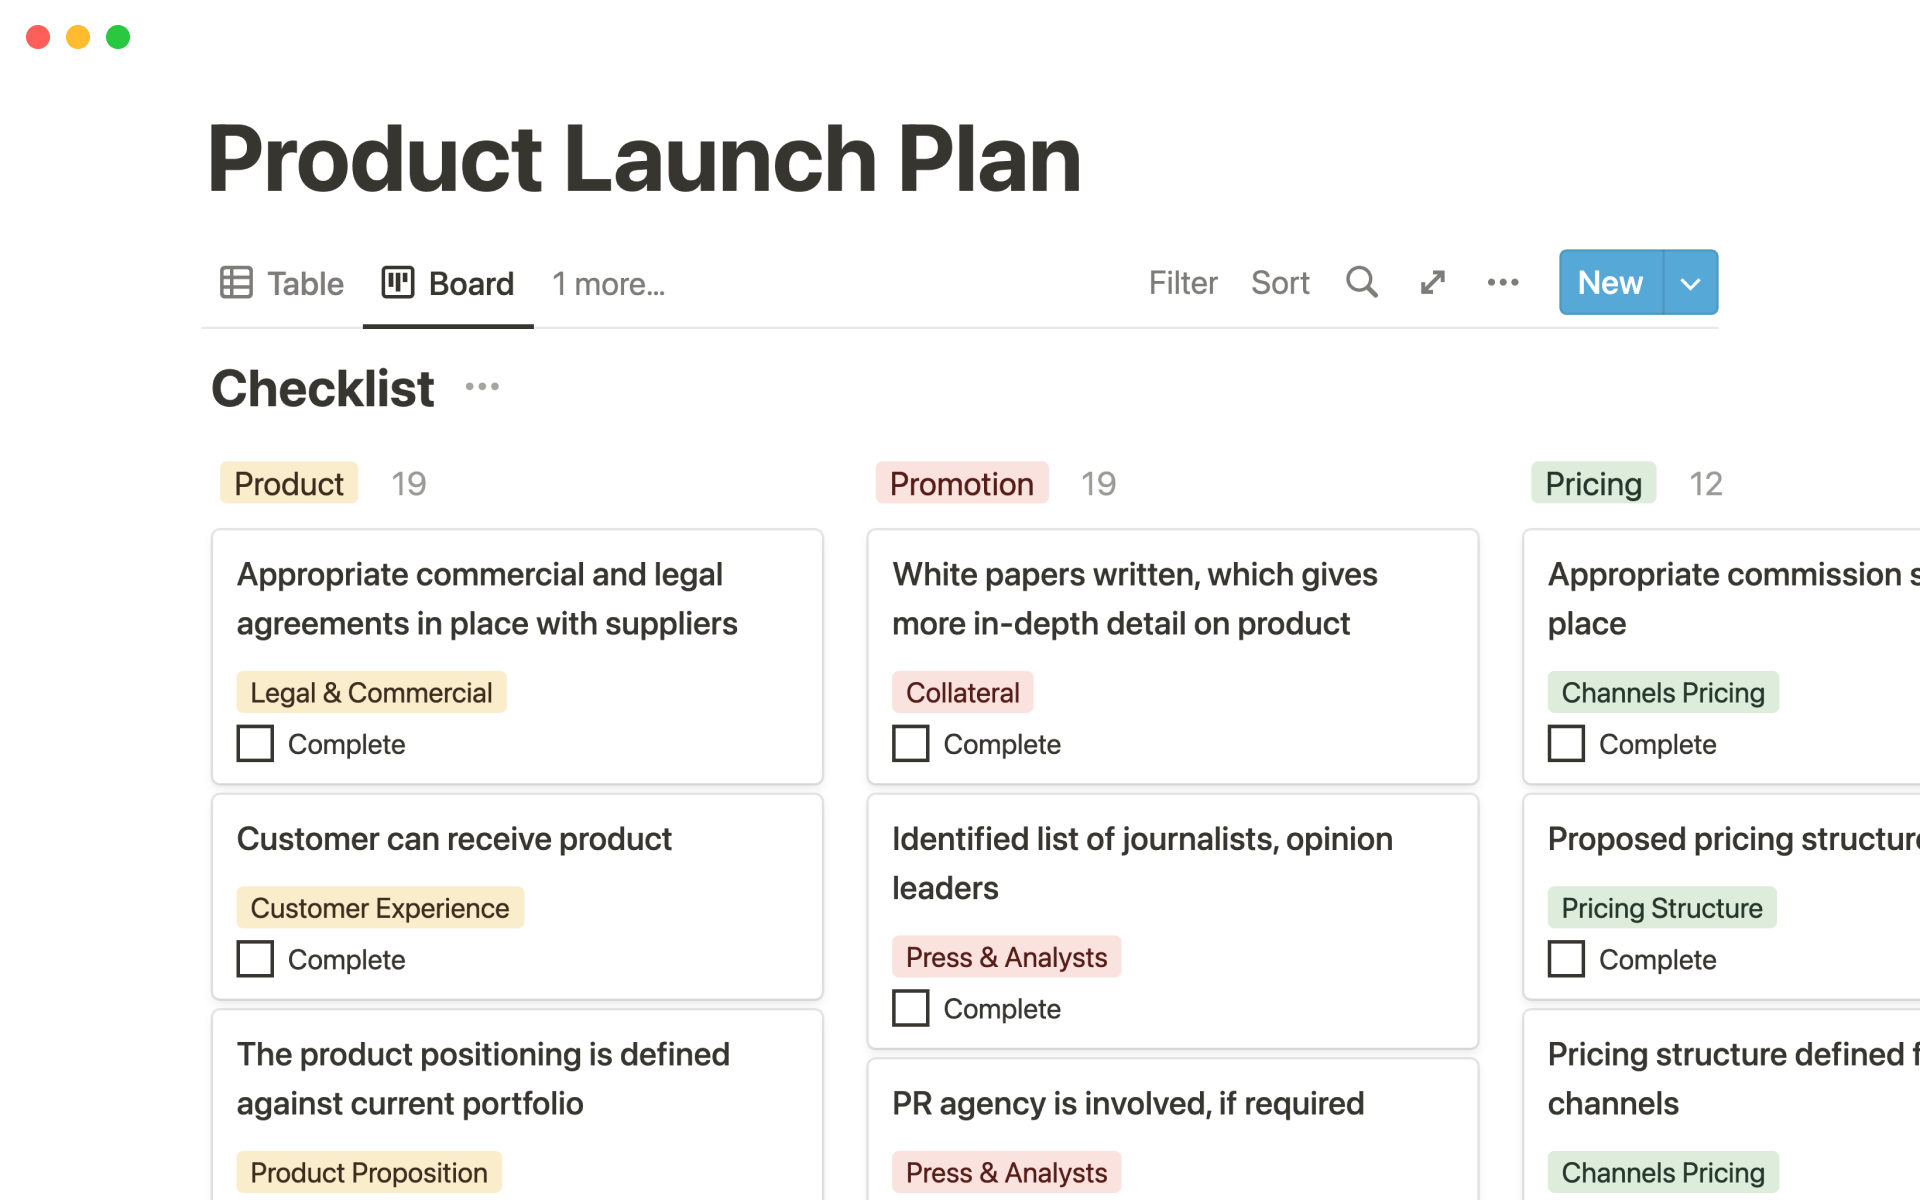 Notion Templates for Launch